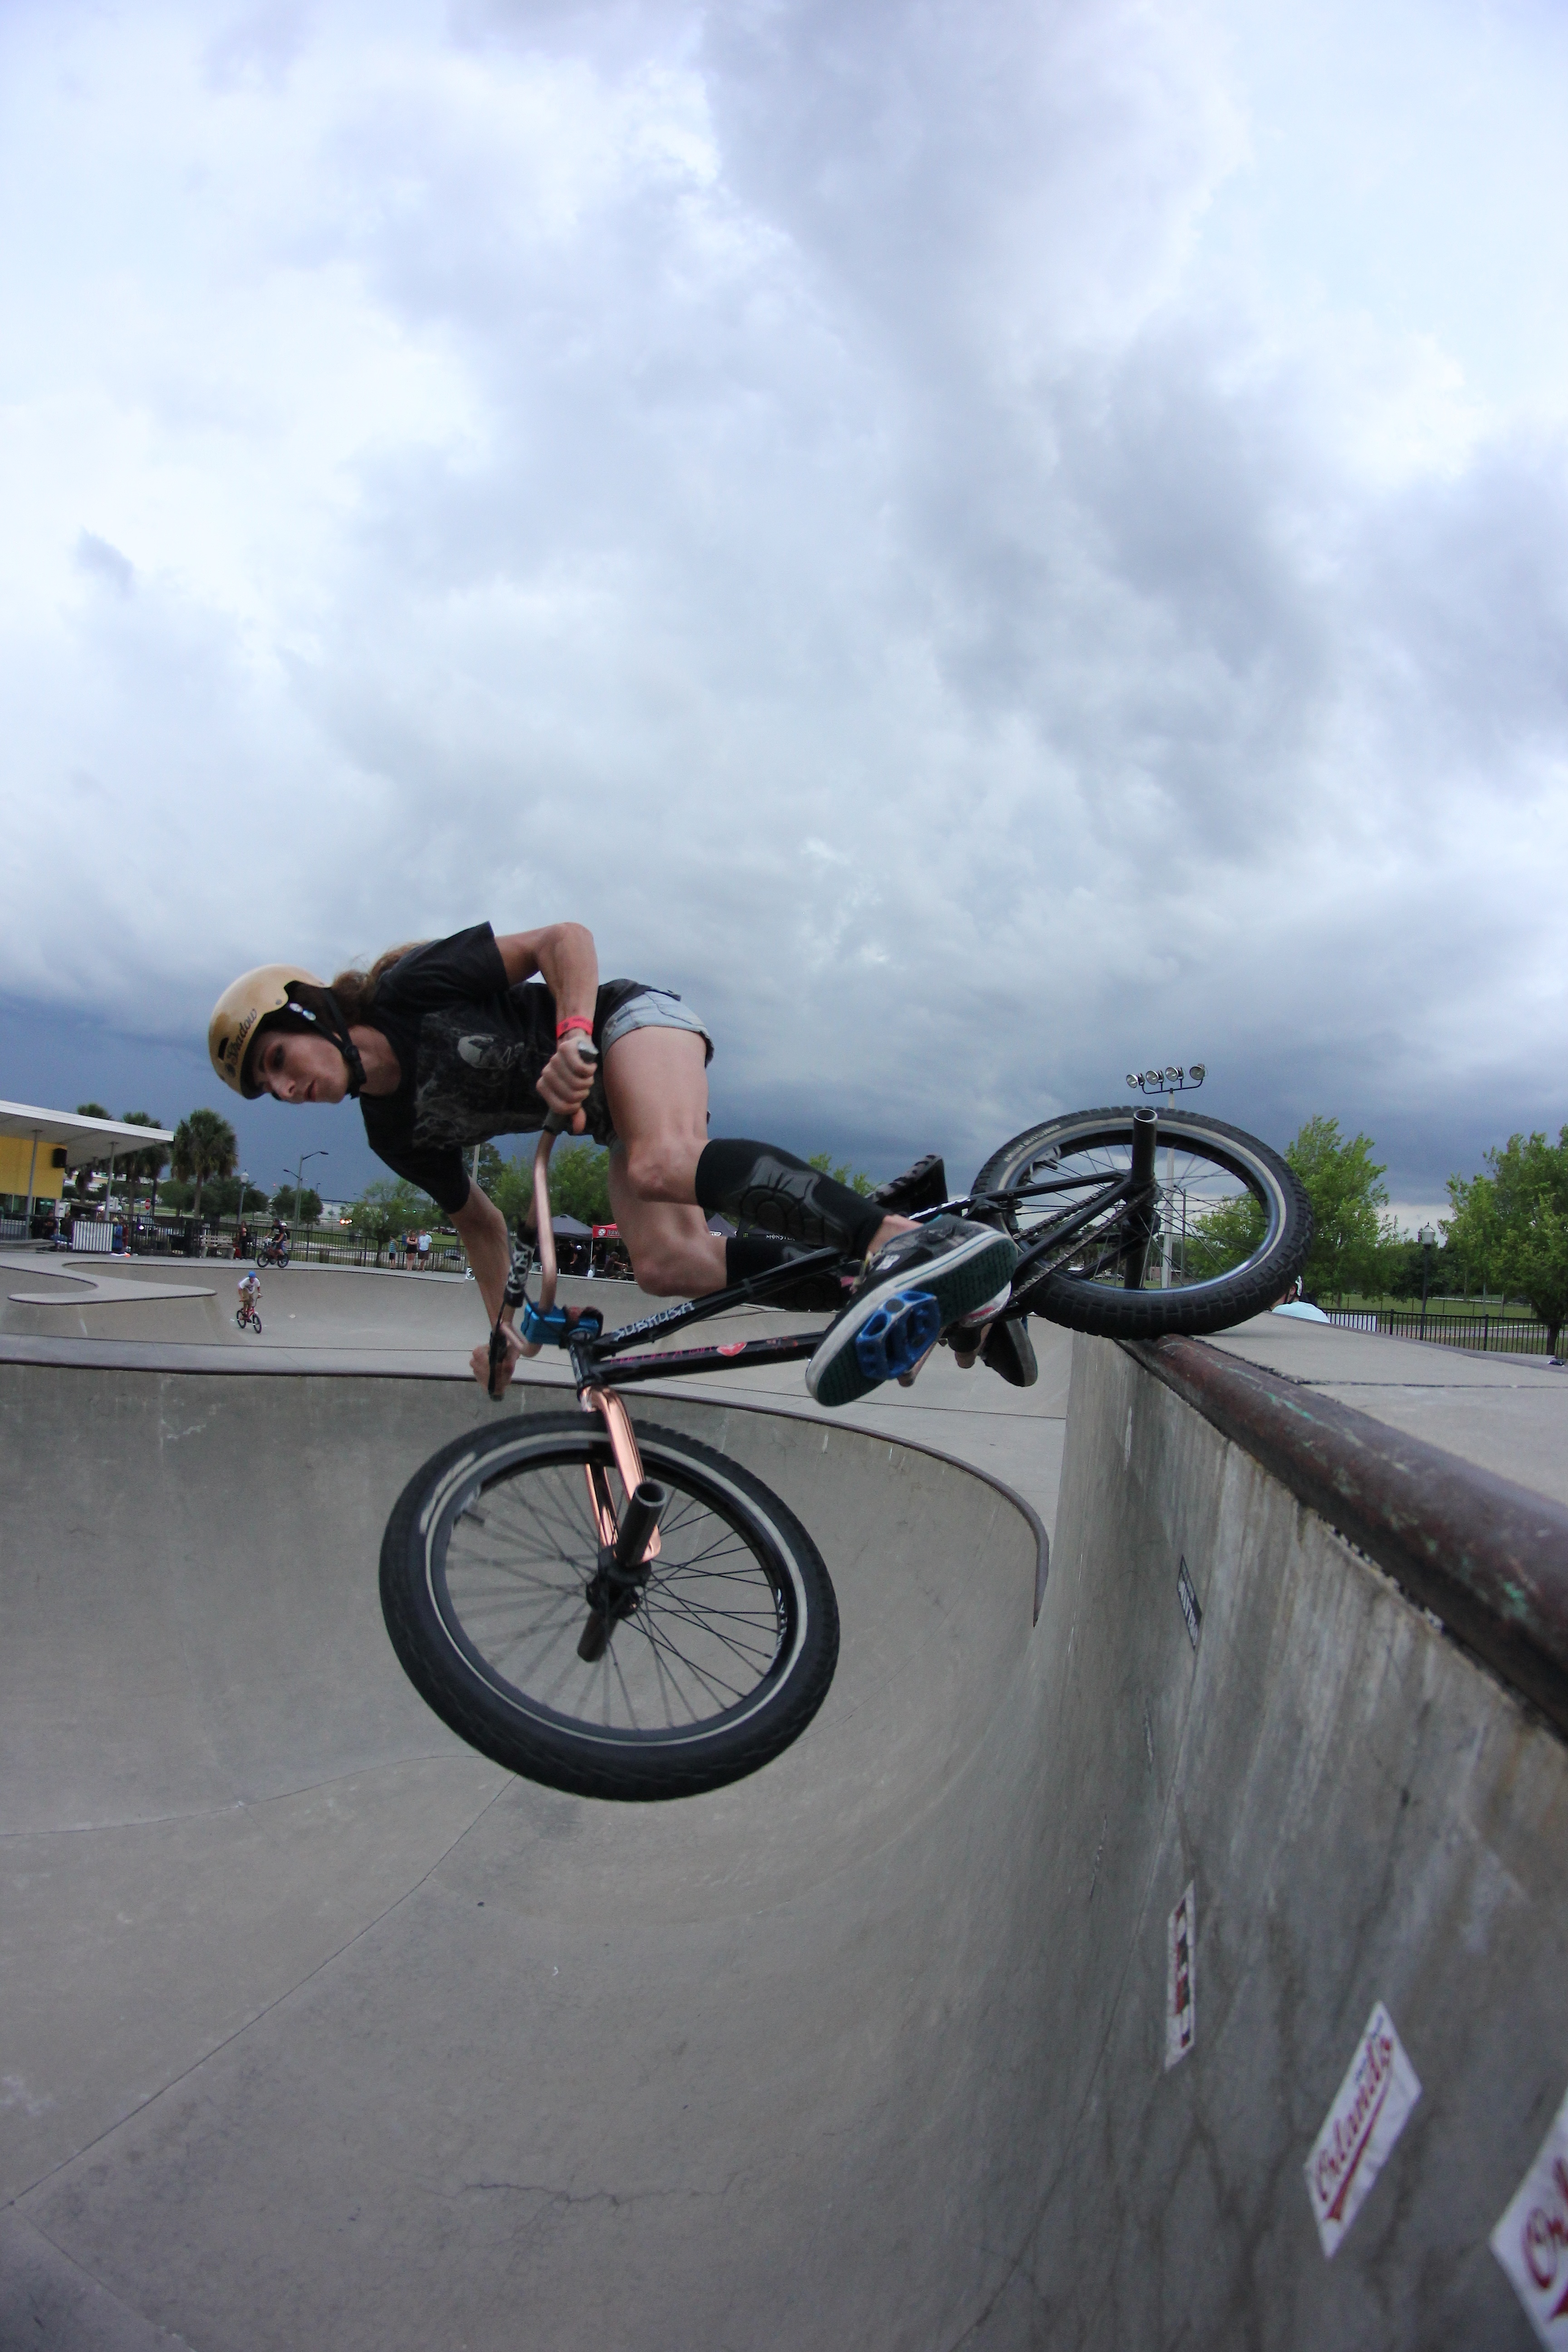 Chelsea Fietsgodin Tire Slide during an angry dusk. Thanks to her for her patience on me shooting this a couple times.